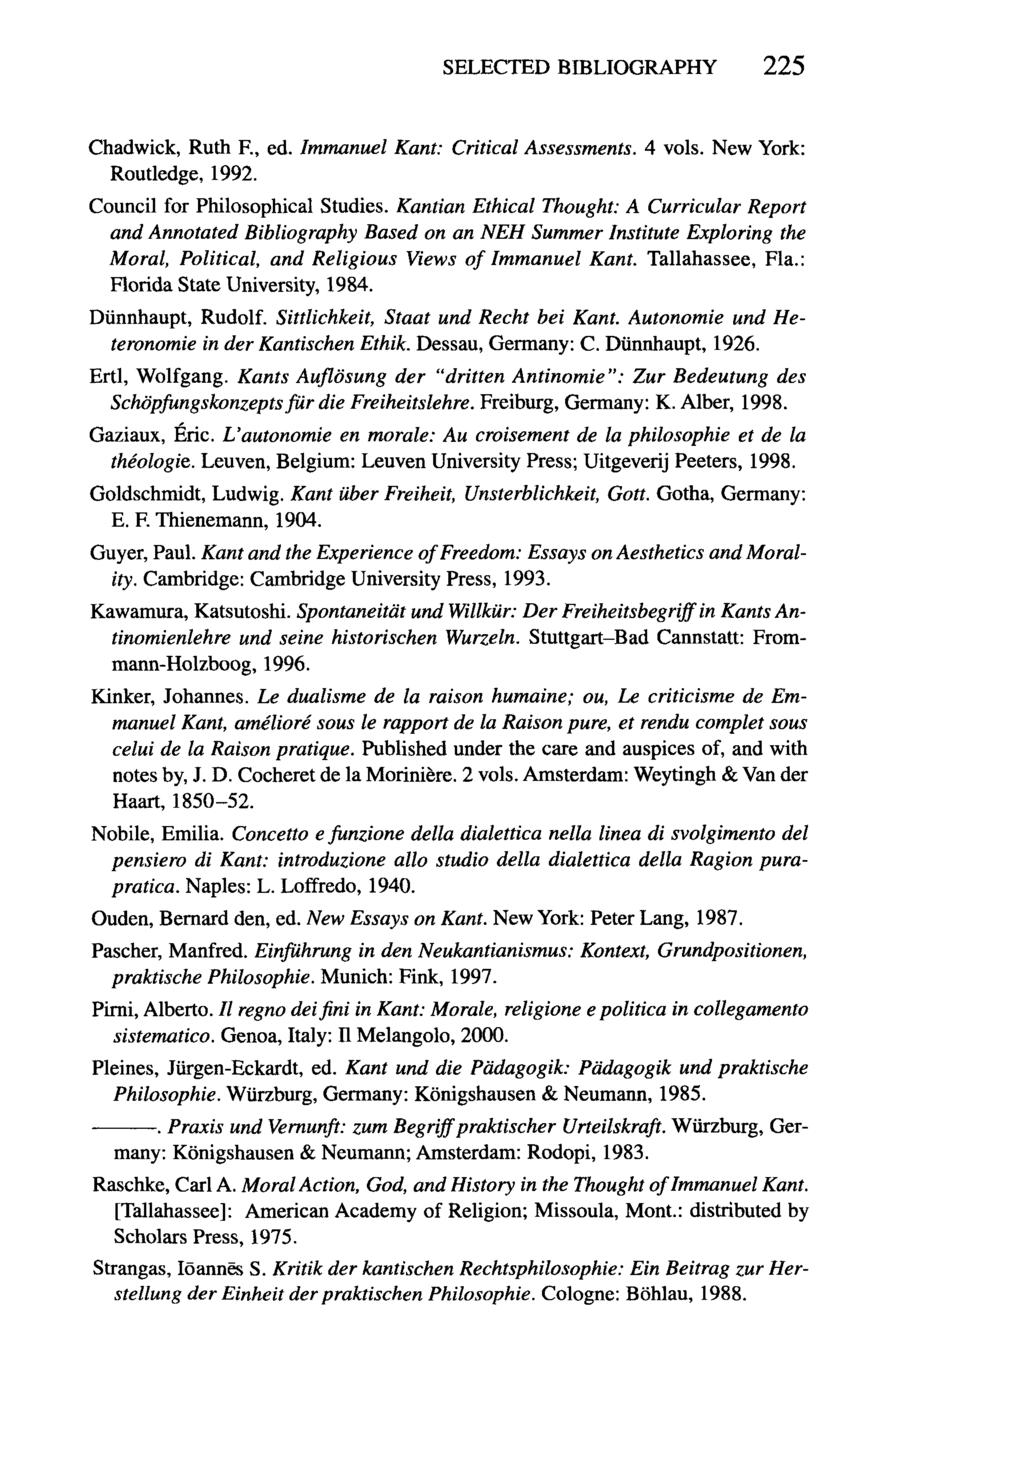 SELECTED BIBLIOGRAPHY 225 Chadwick, Ruth F., ed. Immanuel Kant: Critical Assessments. 4 vols. New York: Routledge, 1992. Council for Philosophical Studies.